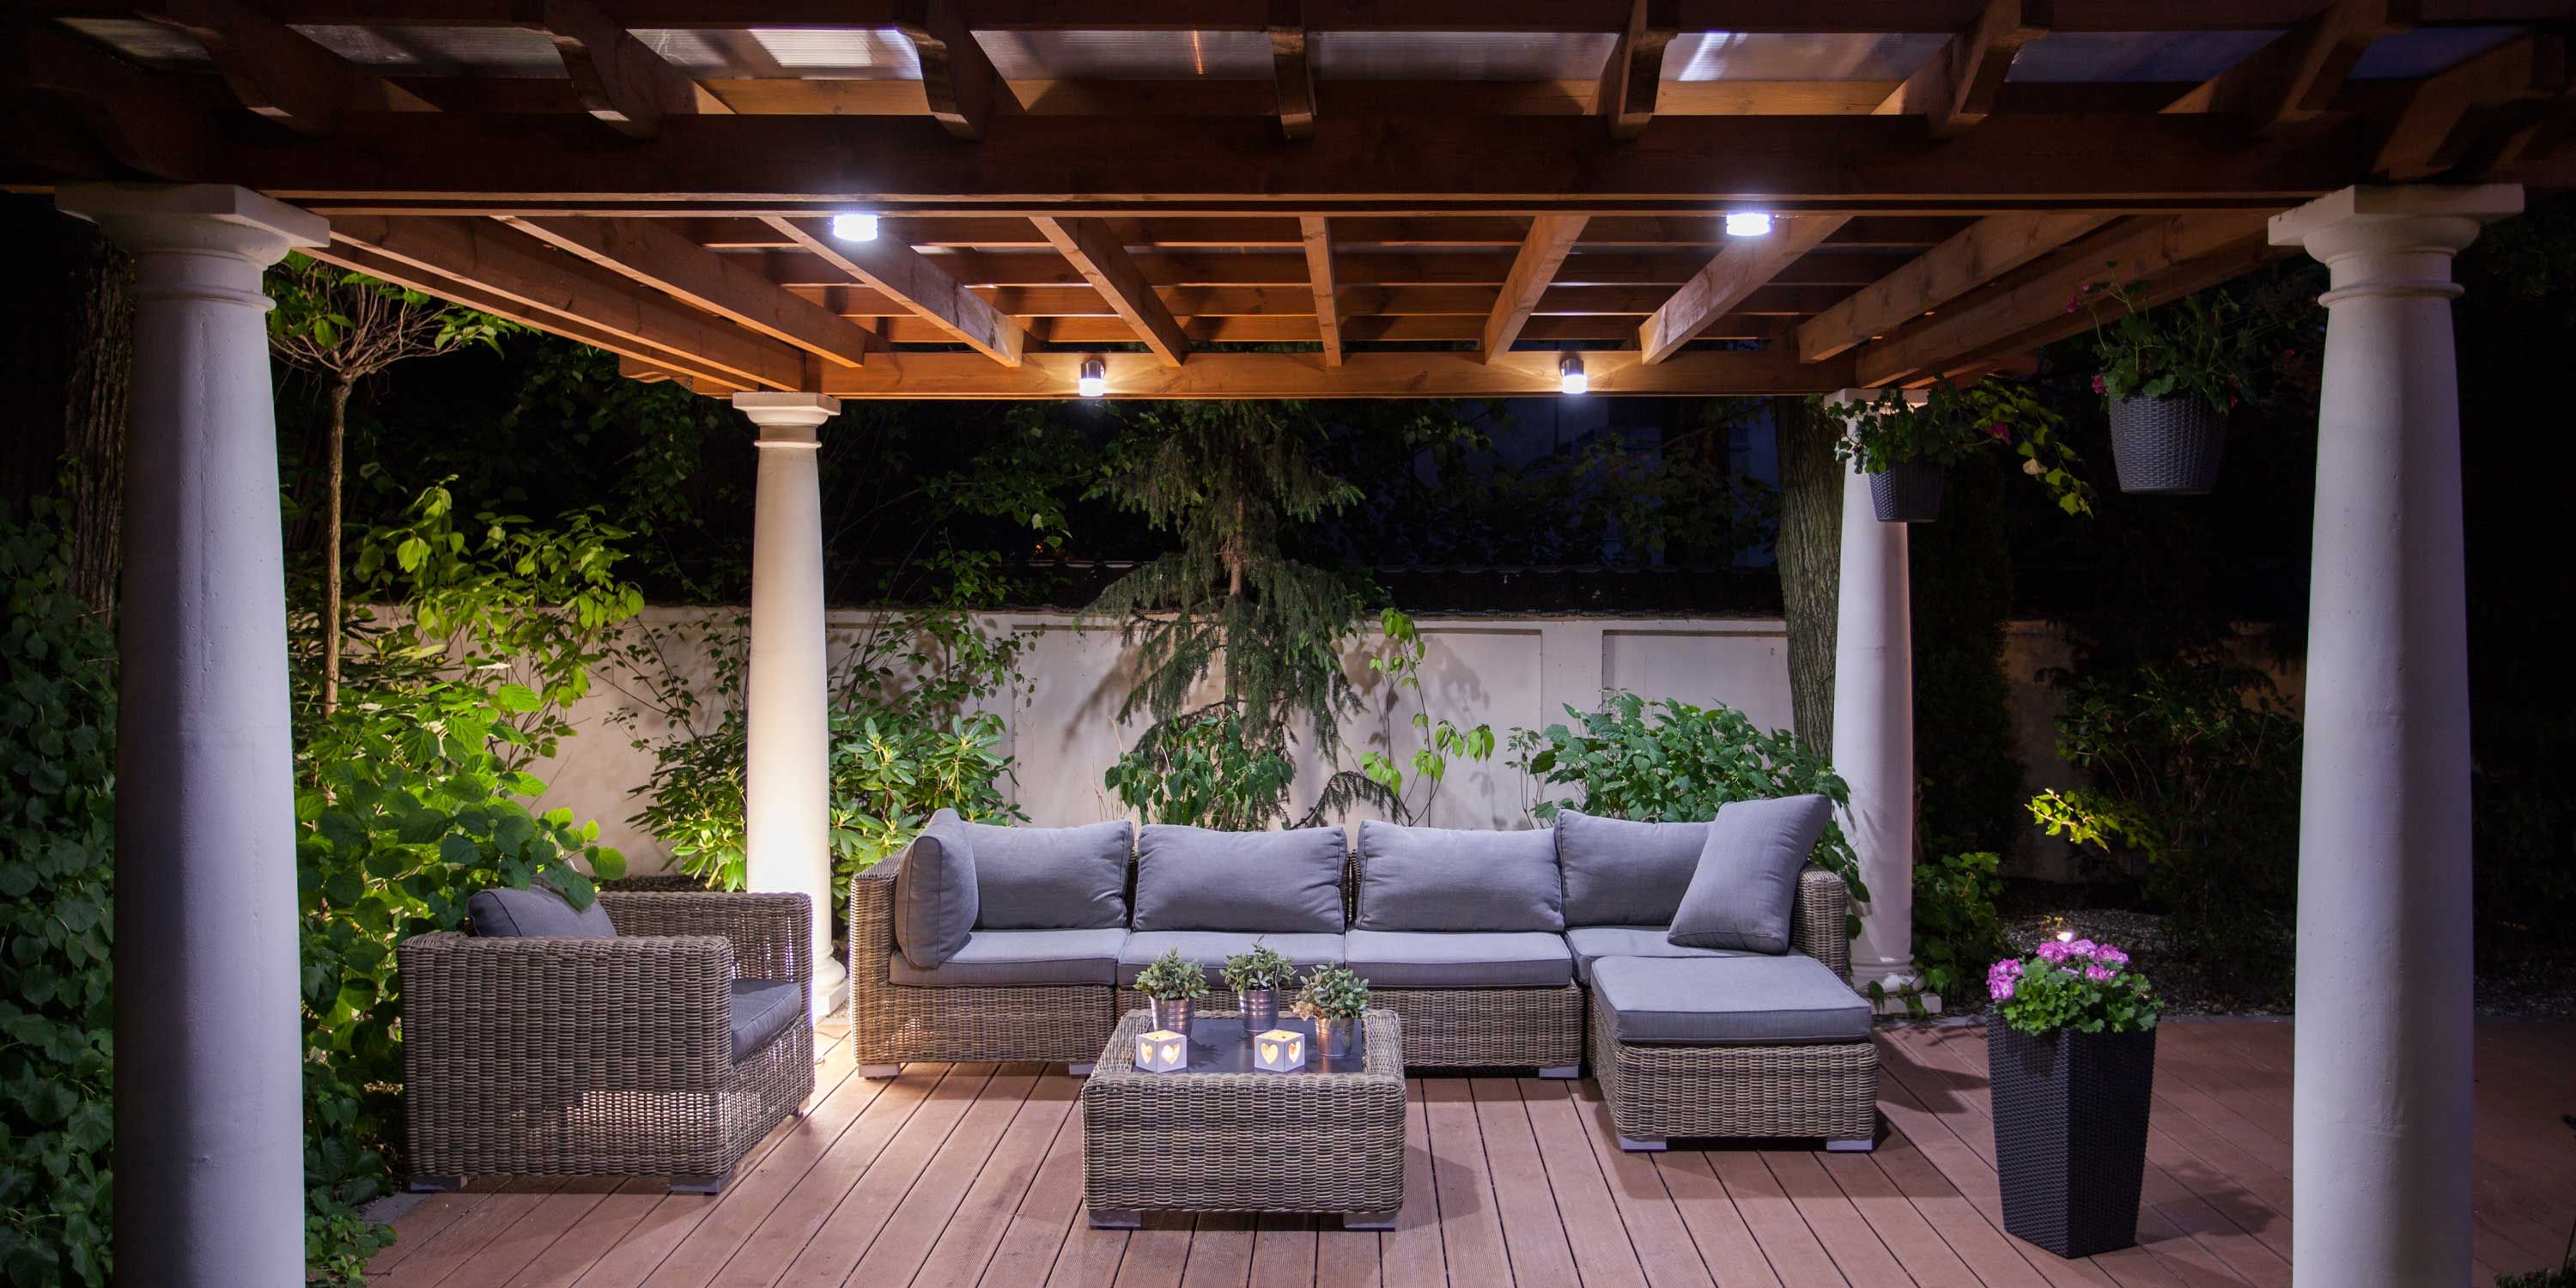 Patio set under wooden gazebo at night with lights on